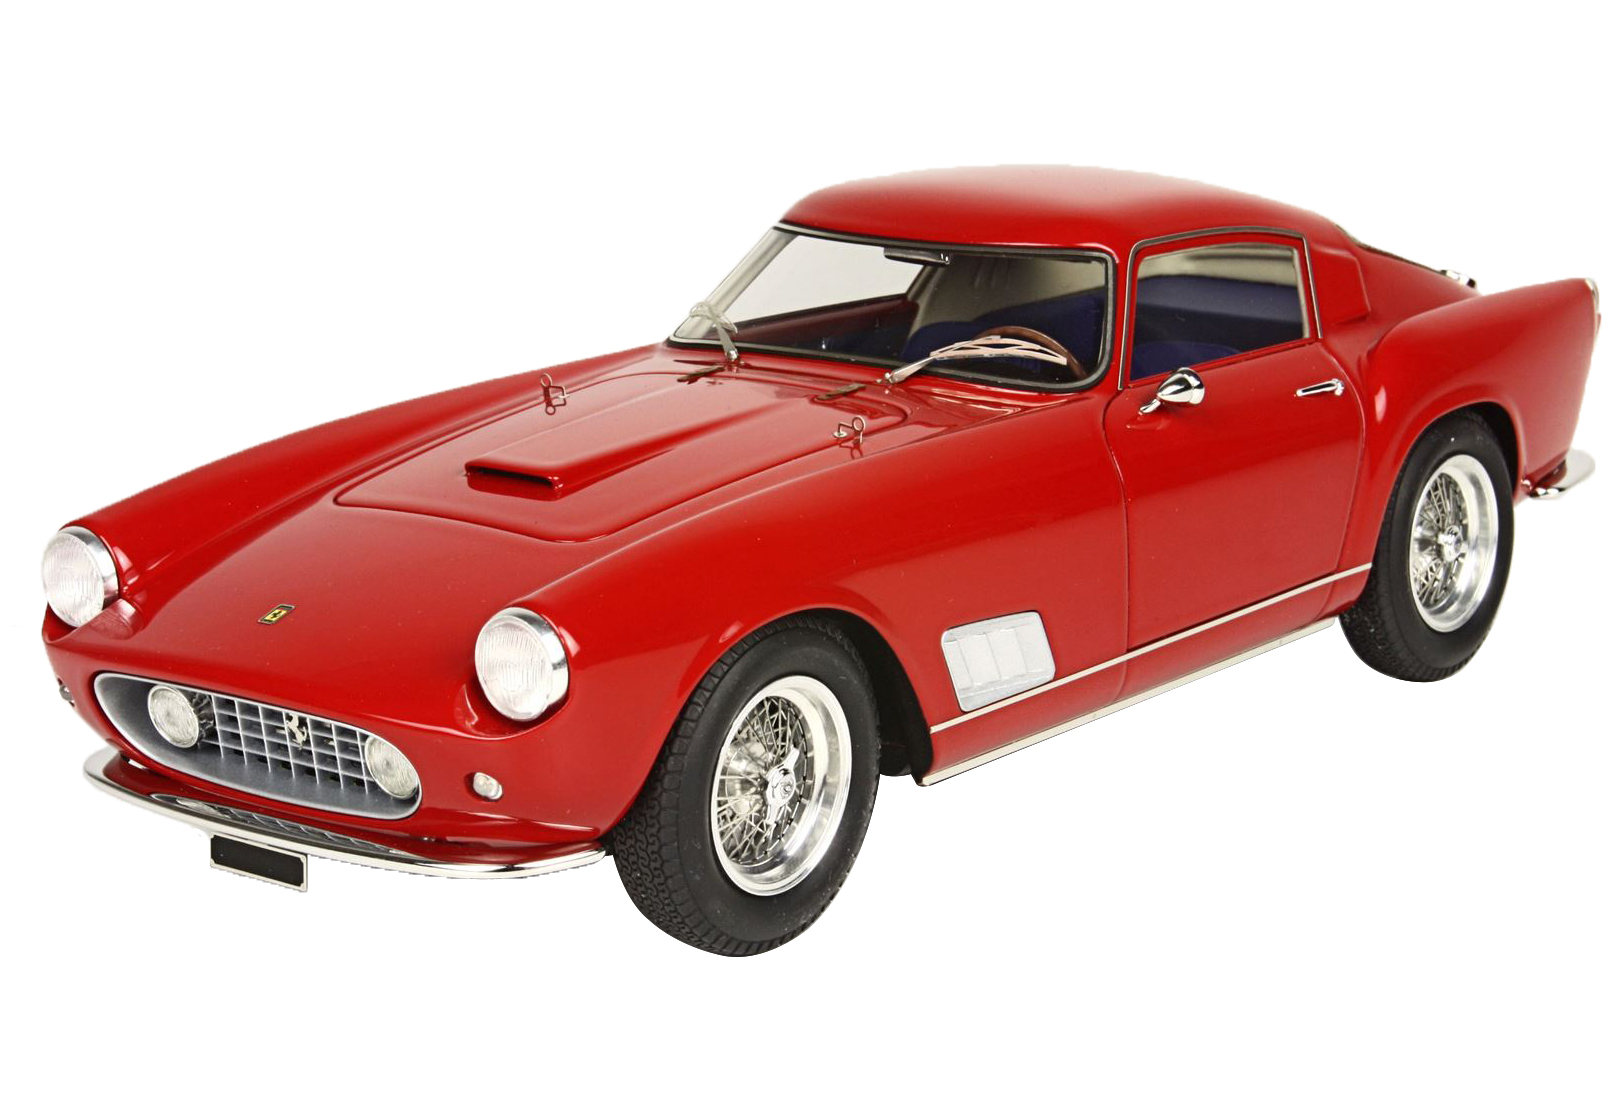 Image of 1958 Ferrari 250 TDF Faro Diritto Red with DISPLAY CASE Limited Edition to 300 pieces Worldwide 1/18 Model Car by BBR